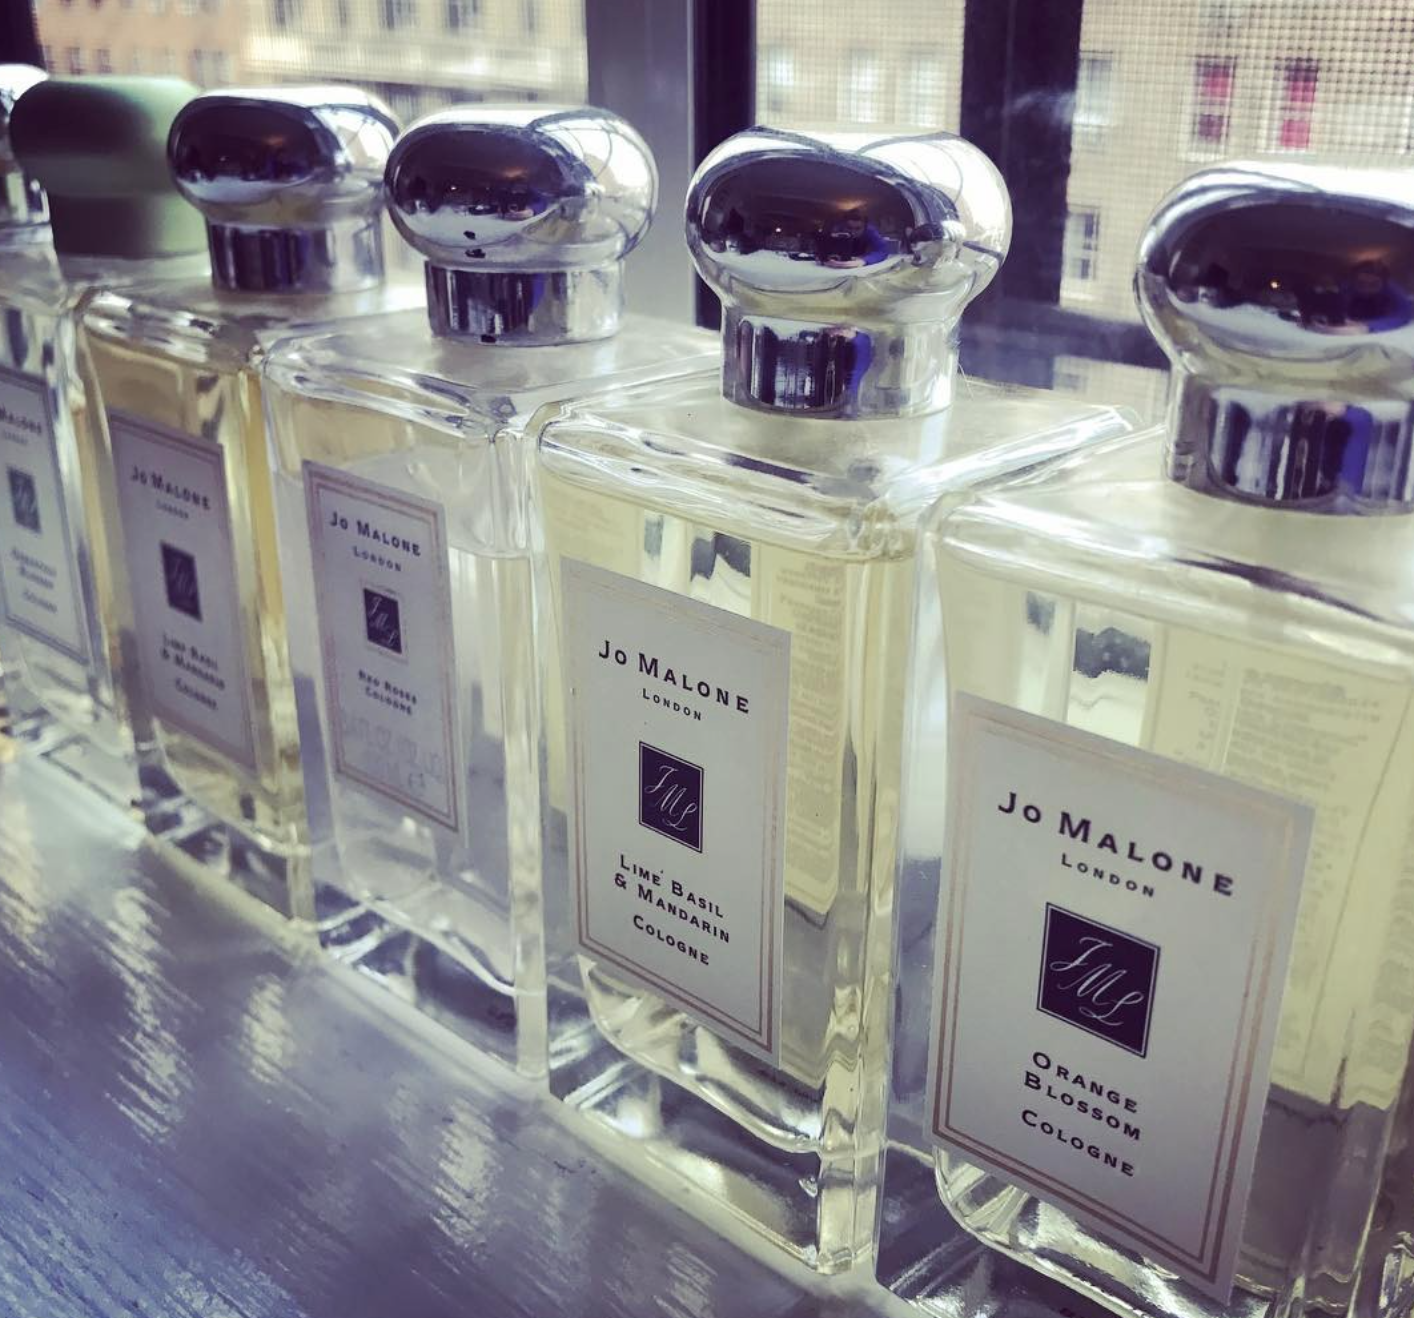 Jo Malone perfumes will be part of Estee Lauder's new fragrance atelier in Paris